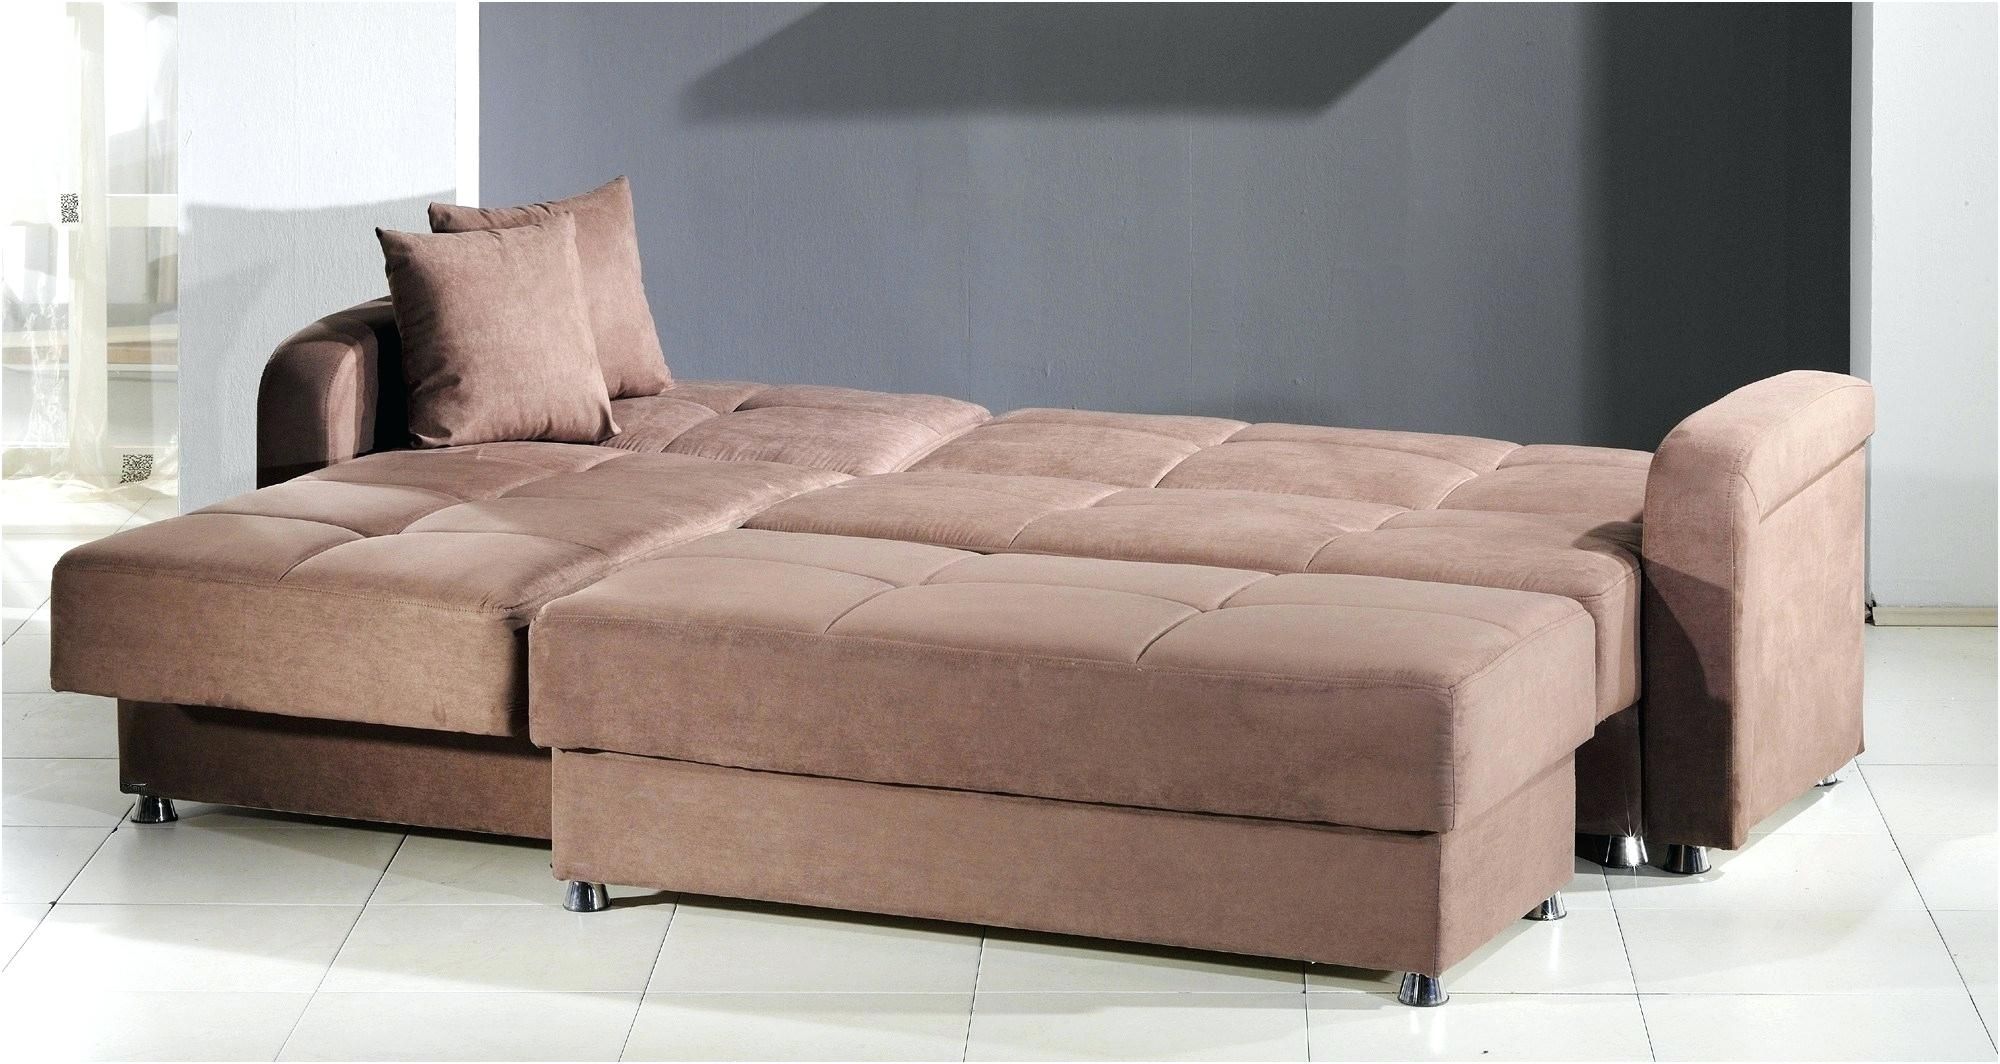 Decoration: Sofa Bed With Storage Underneath Full Size Of Sectional With Nz Sectional Sofas (View 8 of 10)